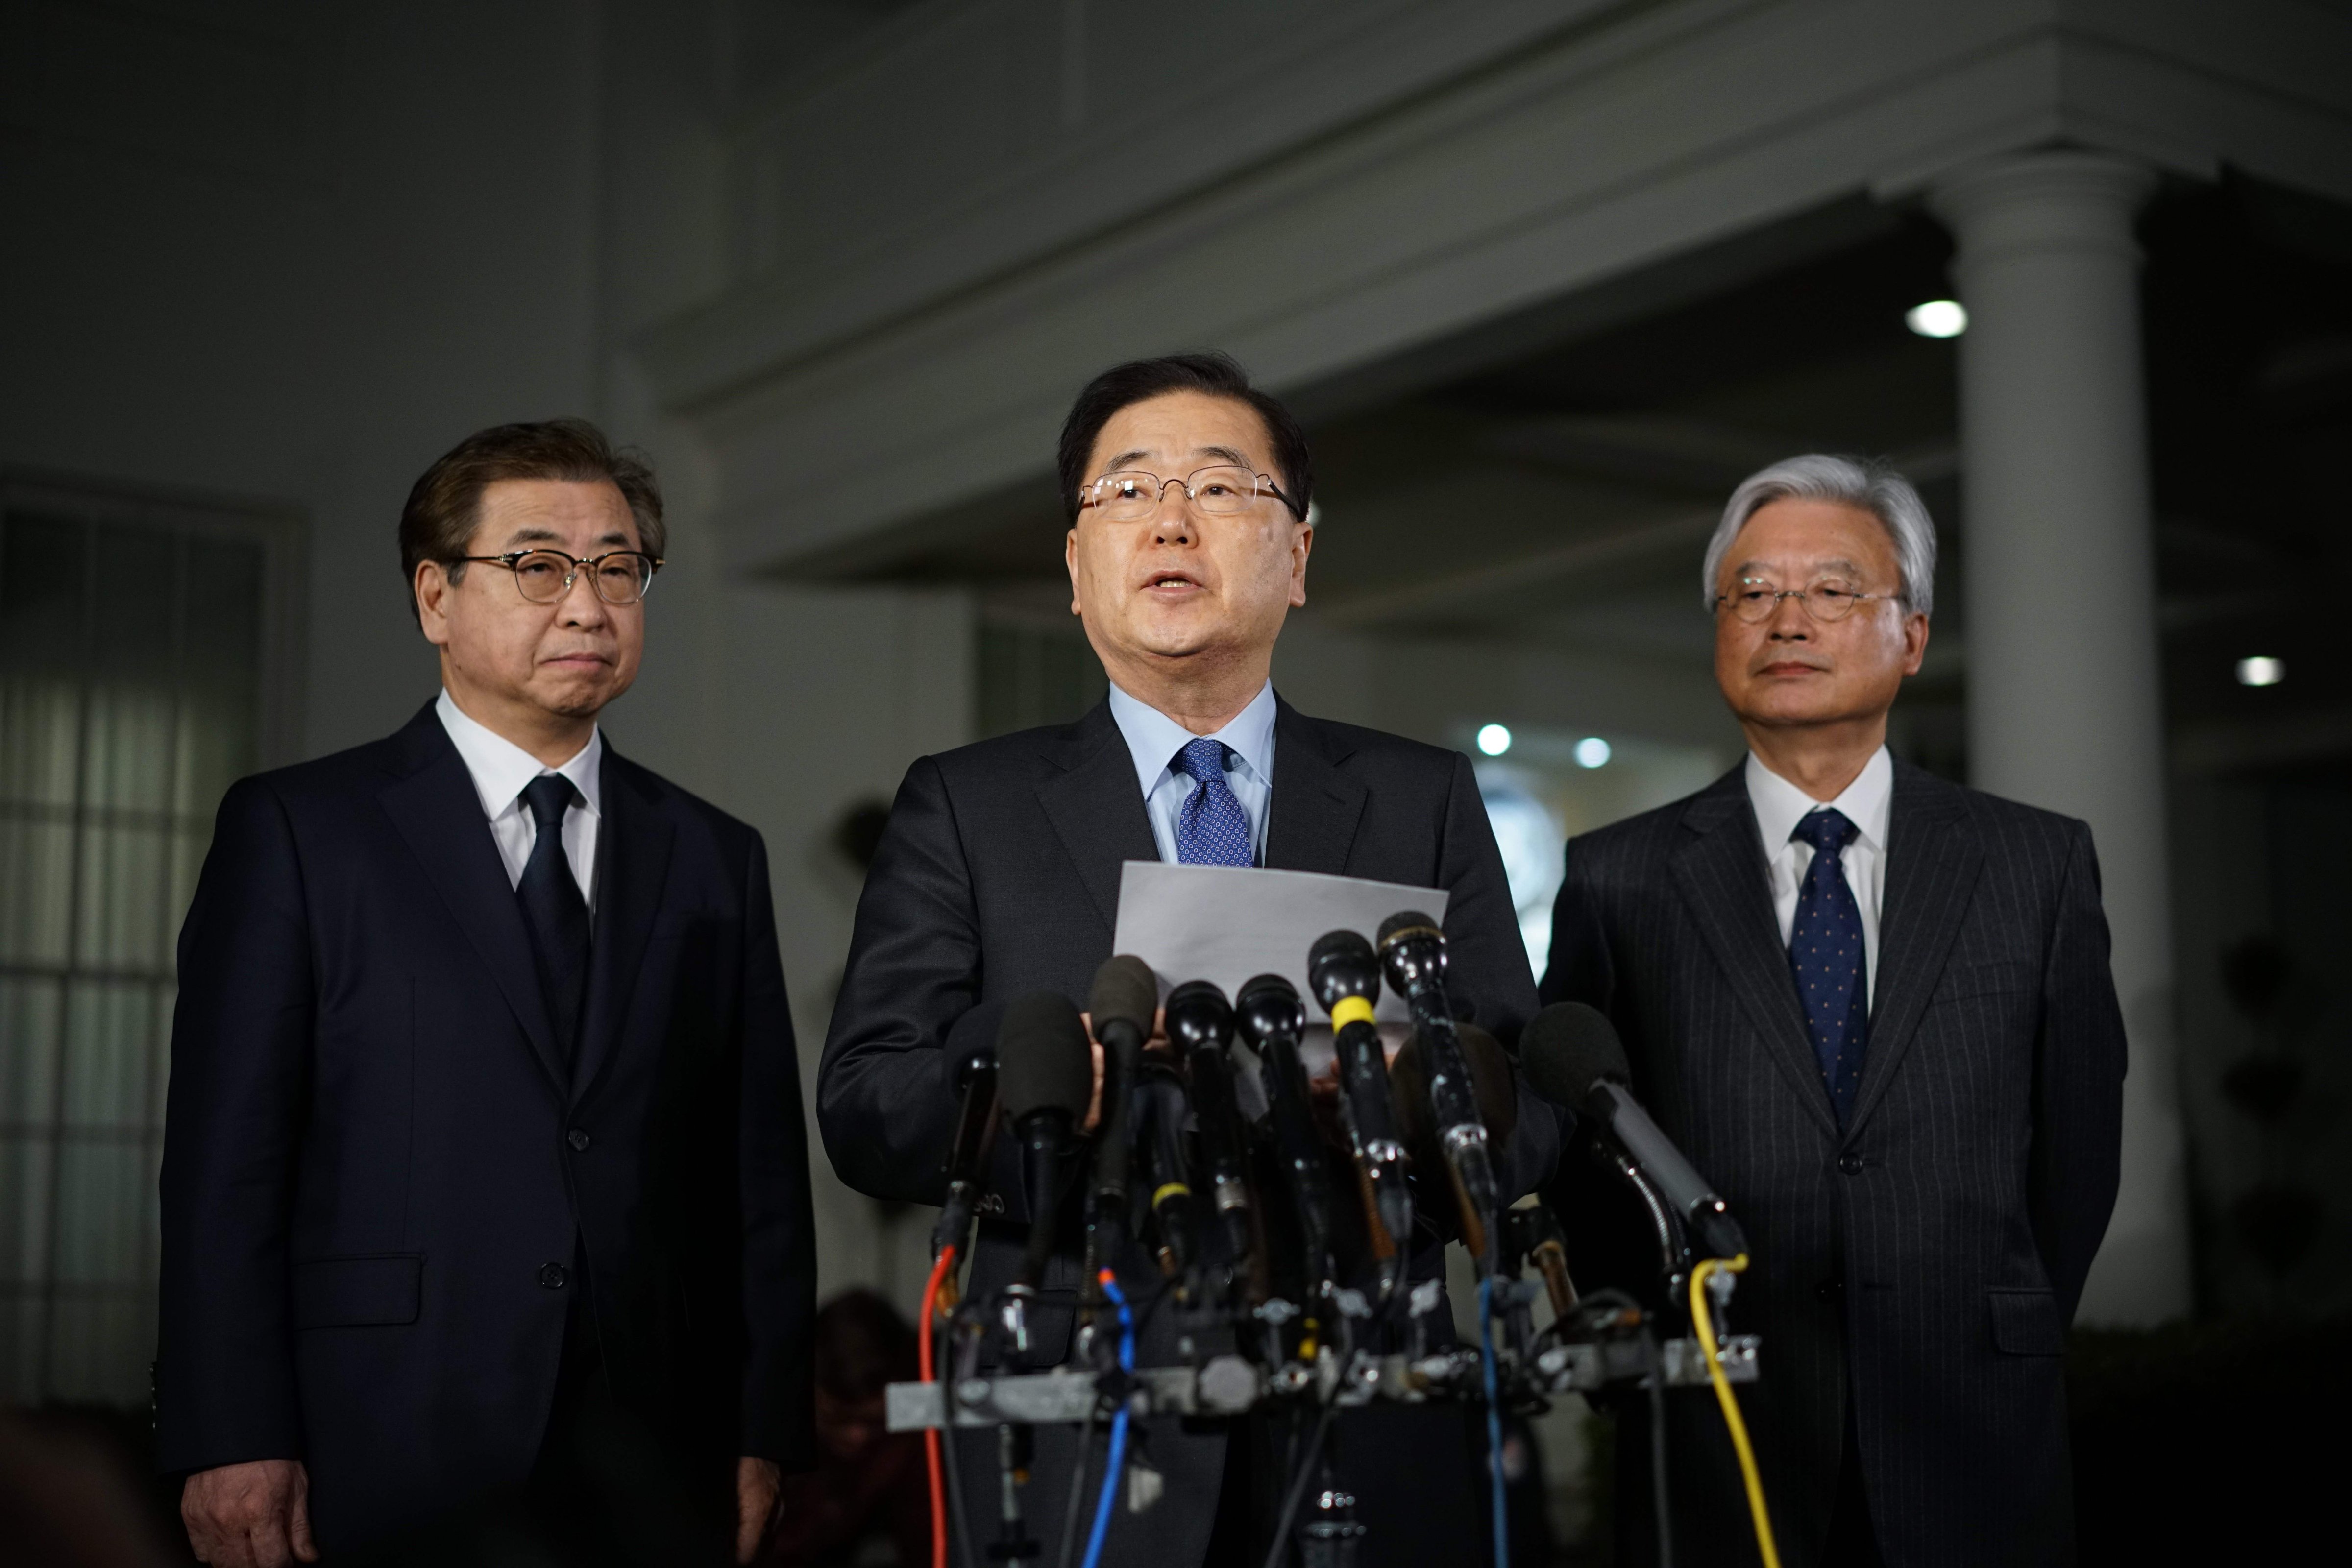 South Korean National Security Advisor Chung Eui-yong flanked by South Korea National Intelligence Service chief Suh Hoon (L) and South Korea's ambassador to the United States Cho Yoon-je (R), outside the West Wing of the White House on March 8, 2018 in Washington, DC. (Mandel Ngan—AFP/Getty Images)